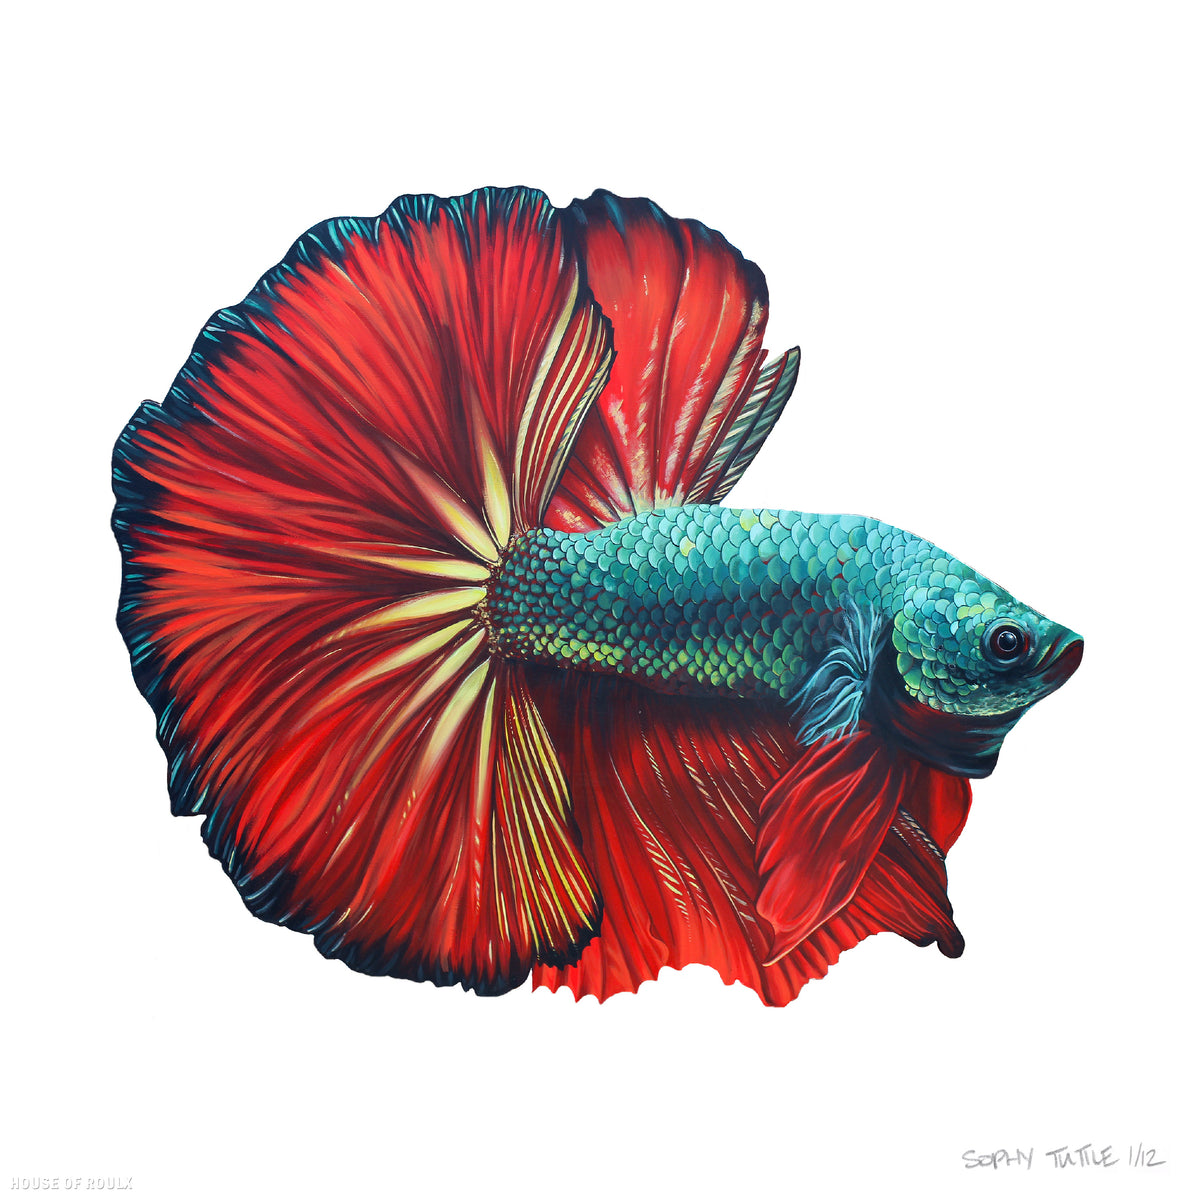 Sophy Tuttle - &quot;Floating Fish 2&quot; - Archival Print, Limited Edition of 12 - 12 x 12&quot;